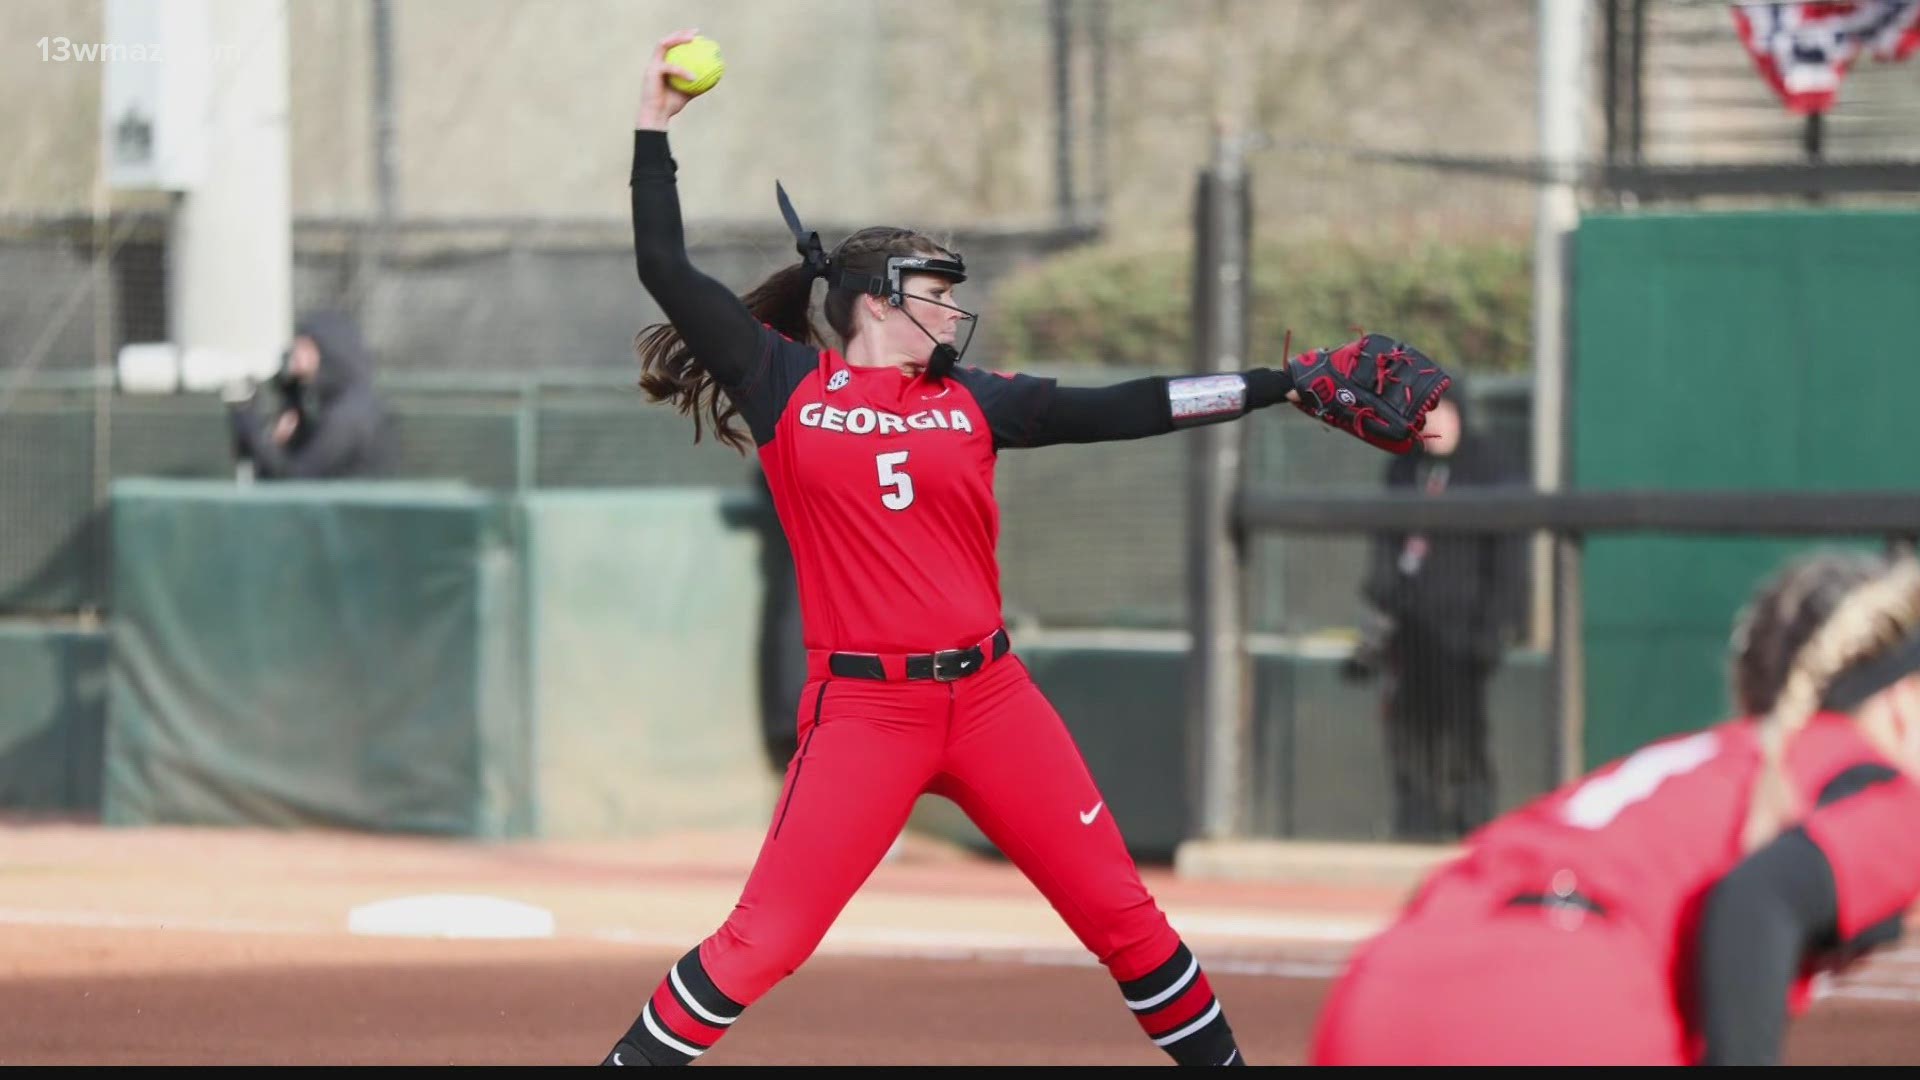 Georgia softball is set to make its fifth program appearance in the Women's College World Series in Oklahoma City this week.